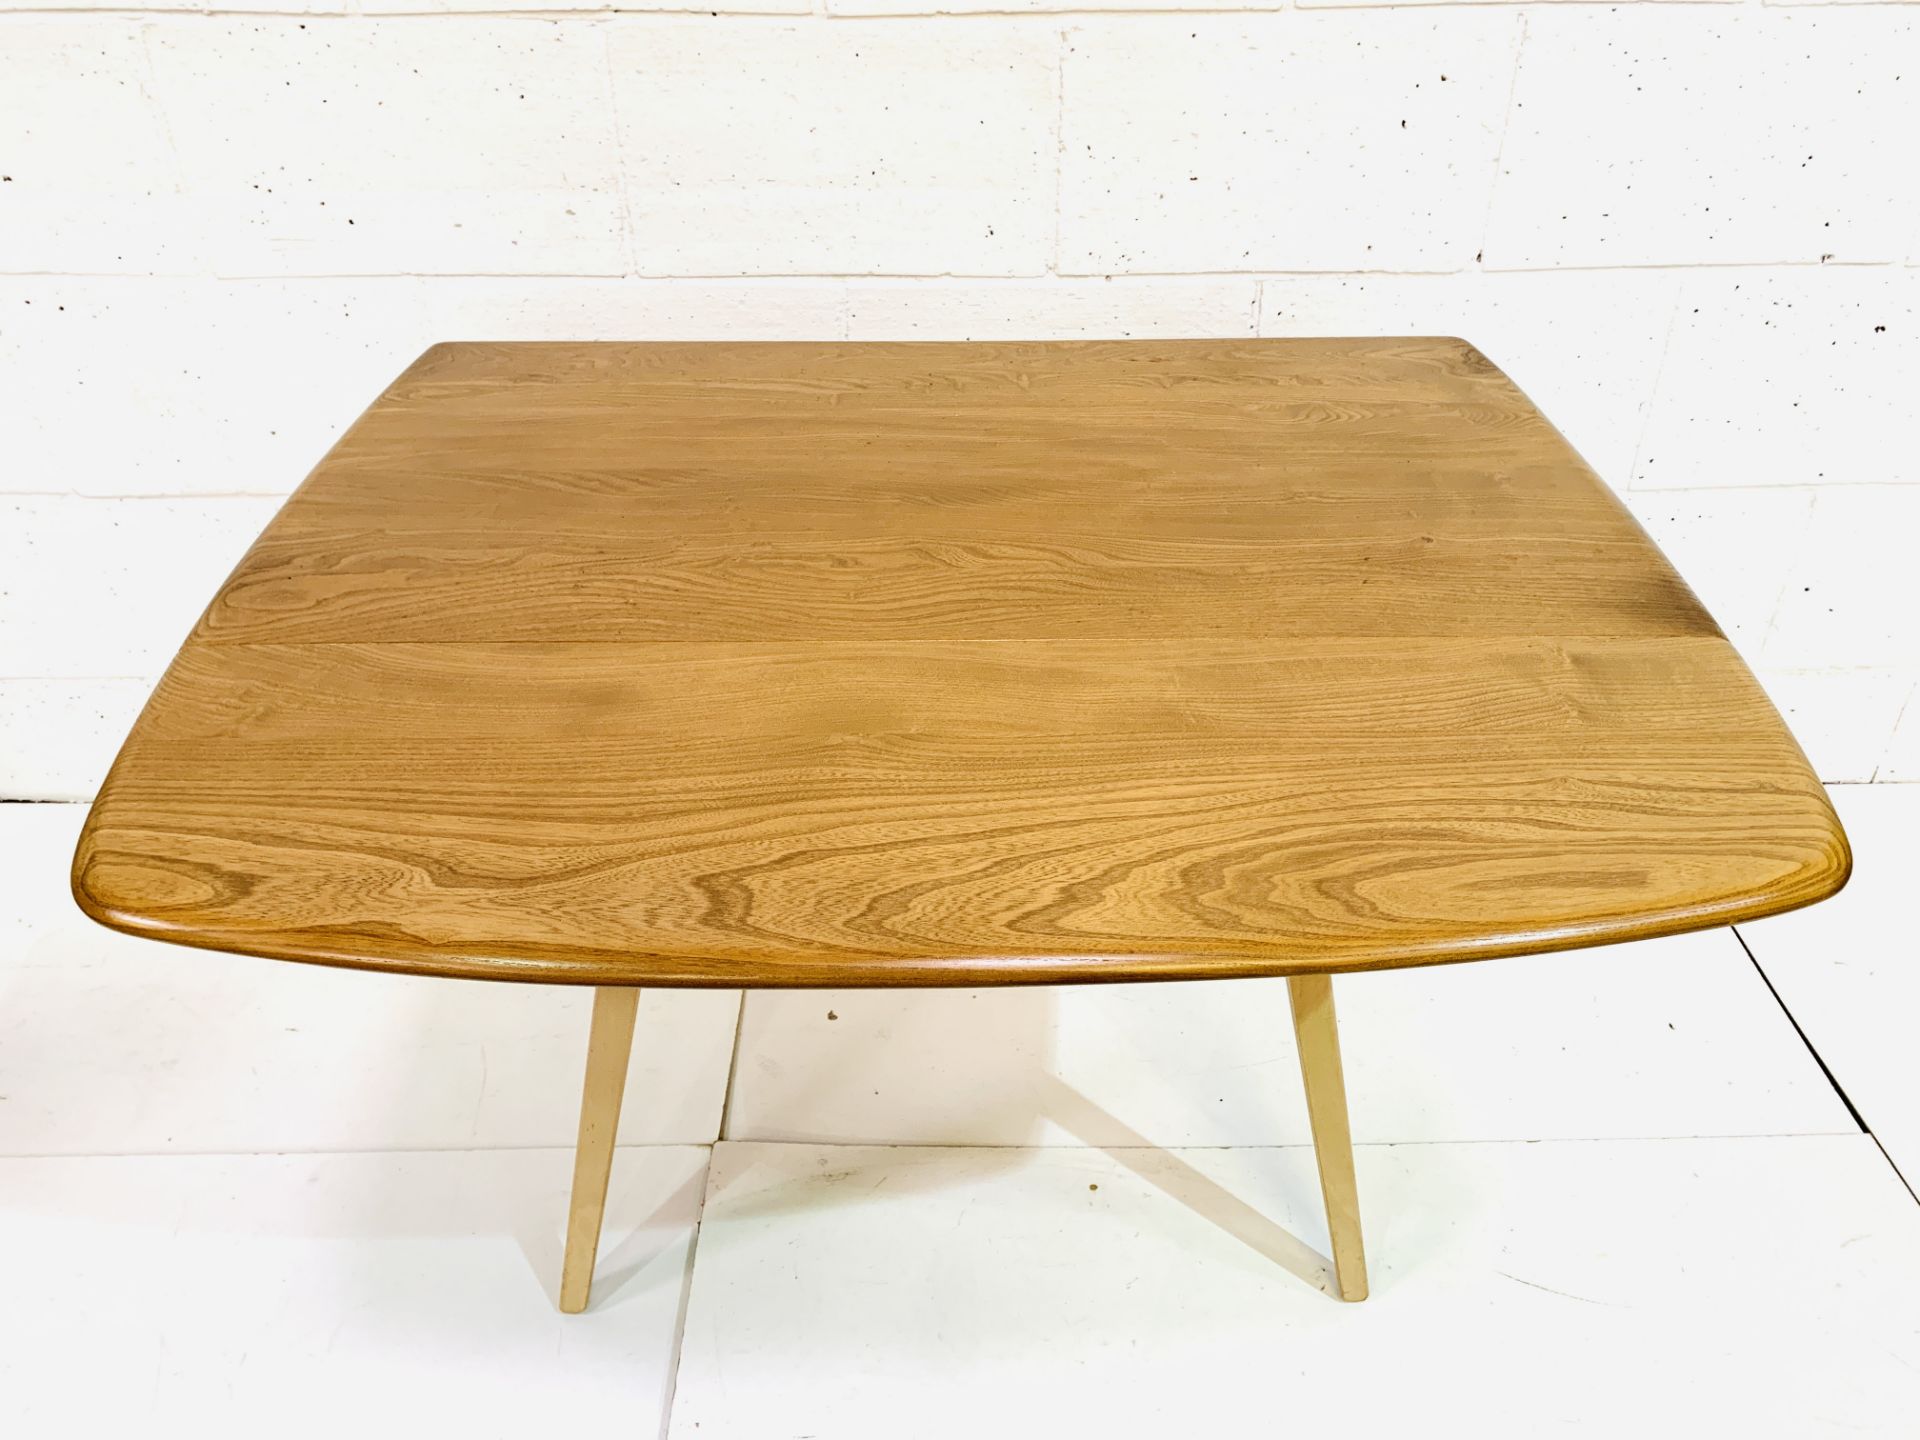 Ercol drop side dining table - Image 3 of 5